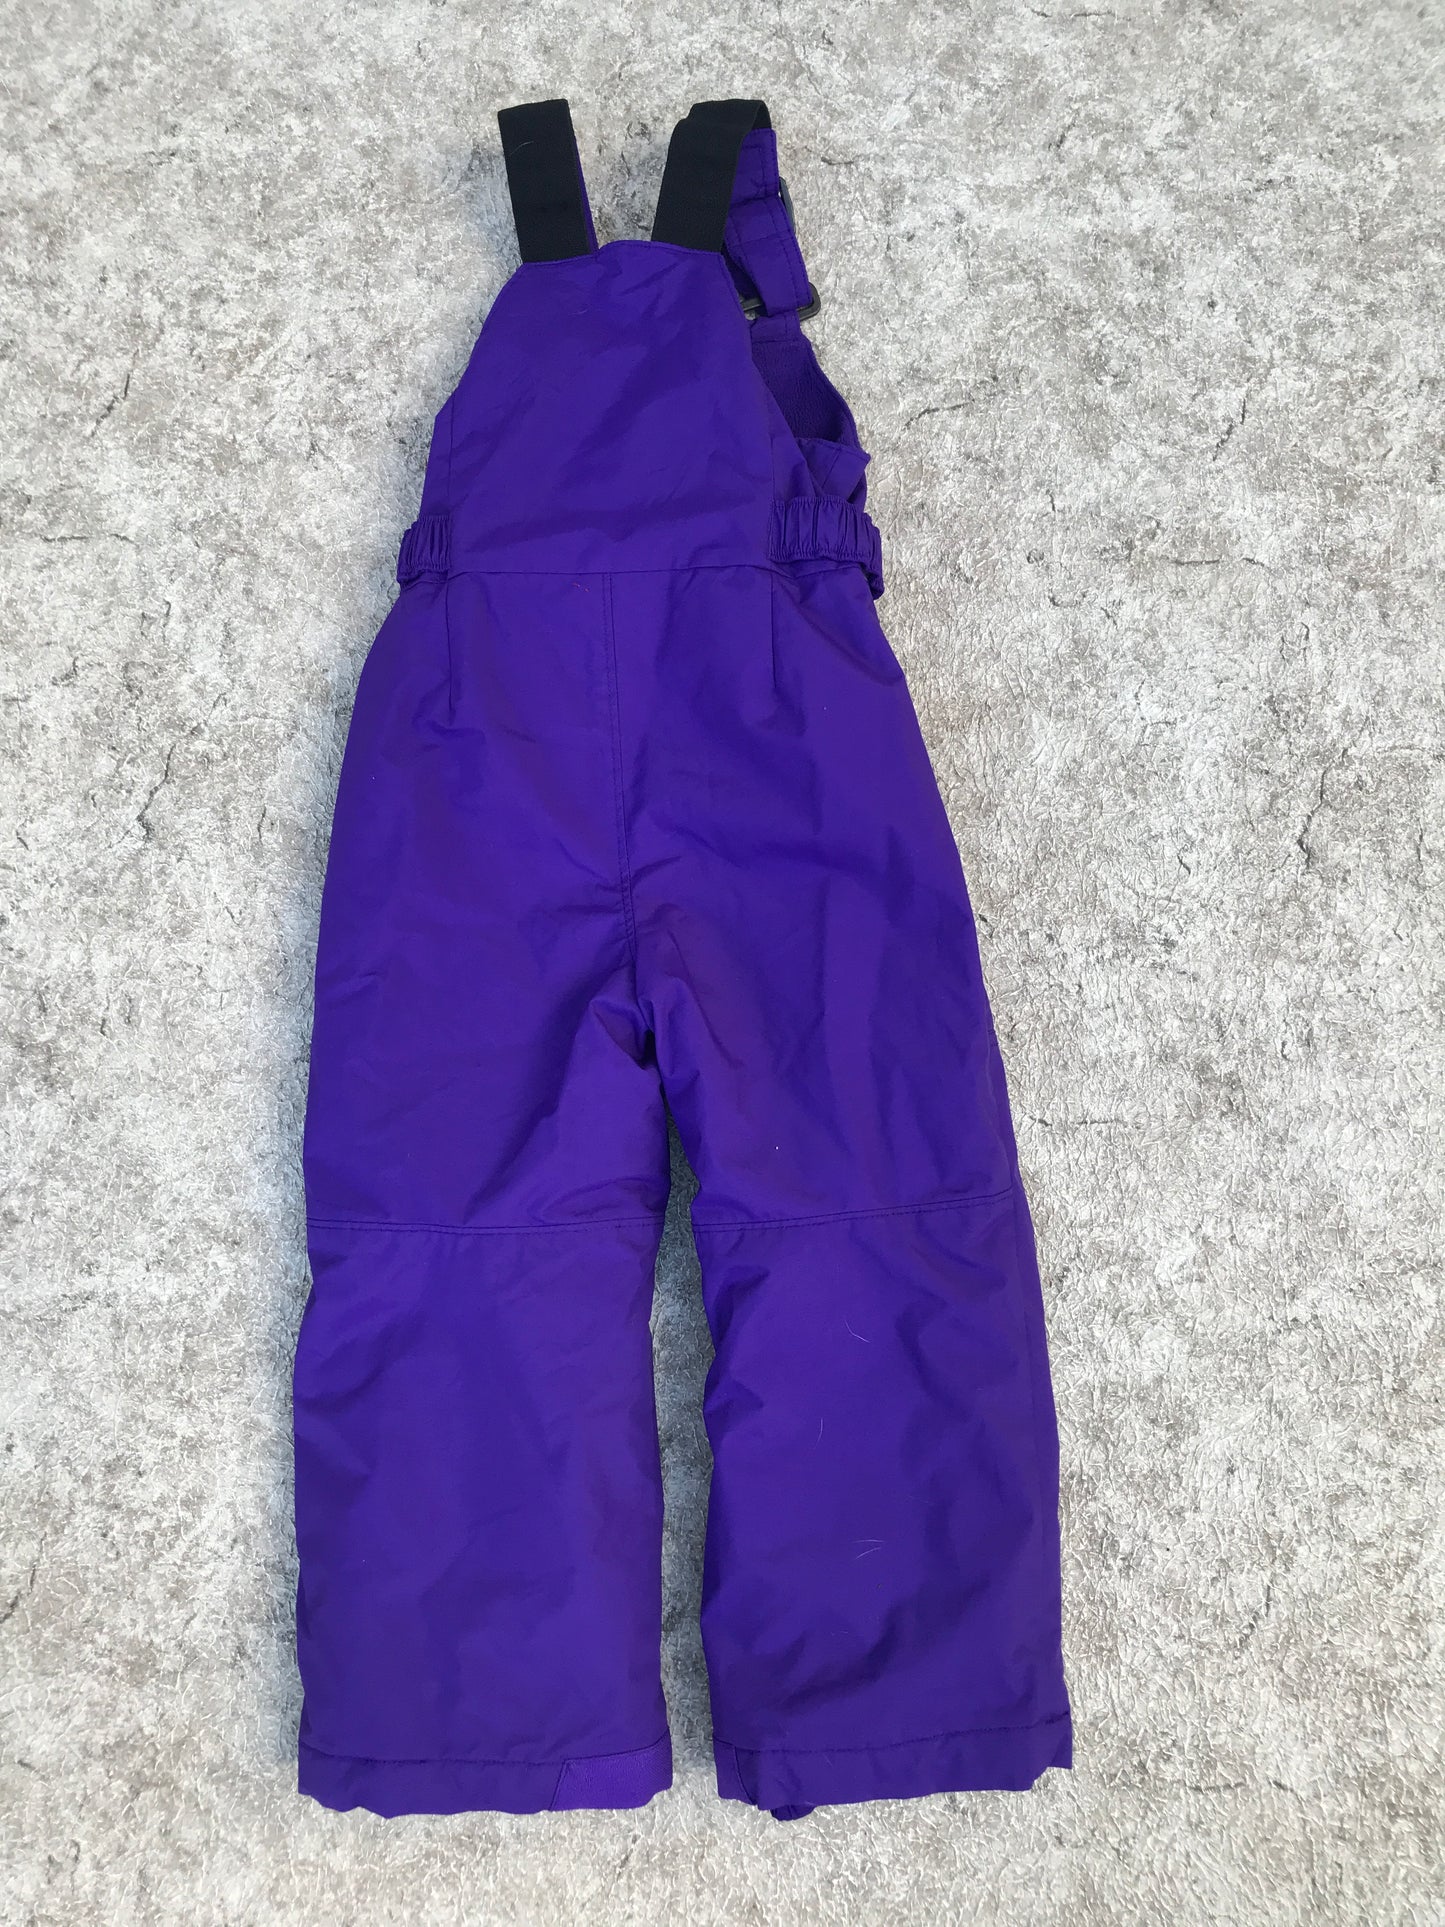 Snow Pants Child Size 4 Columbia Purple With Bib Outstanding Quality Like New is